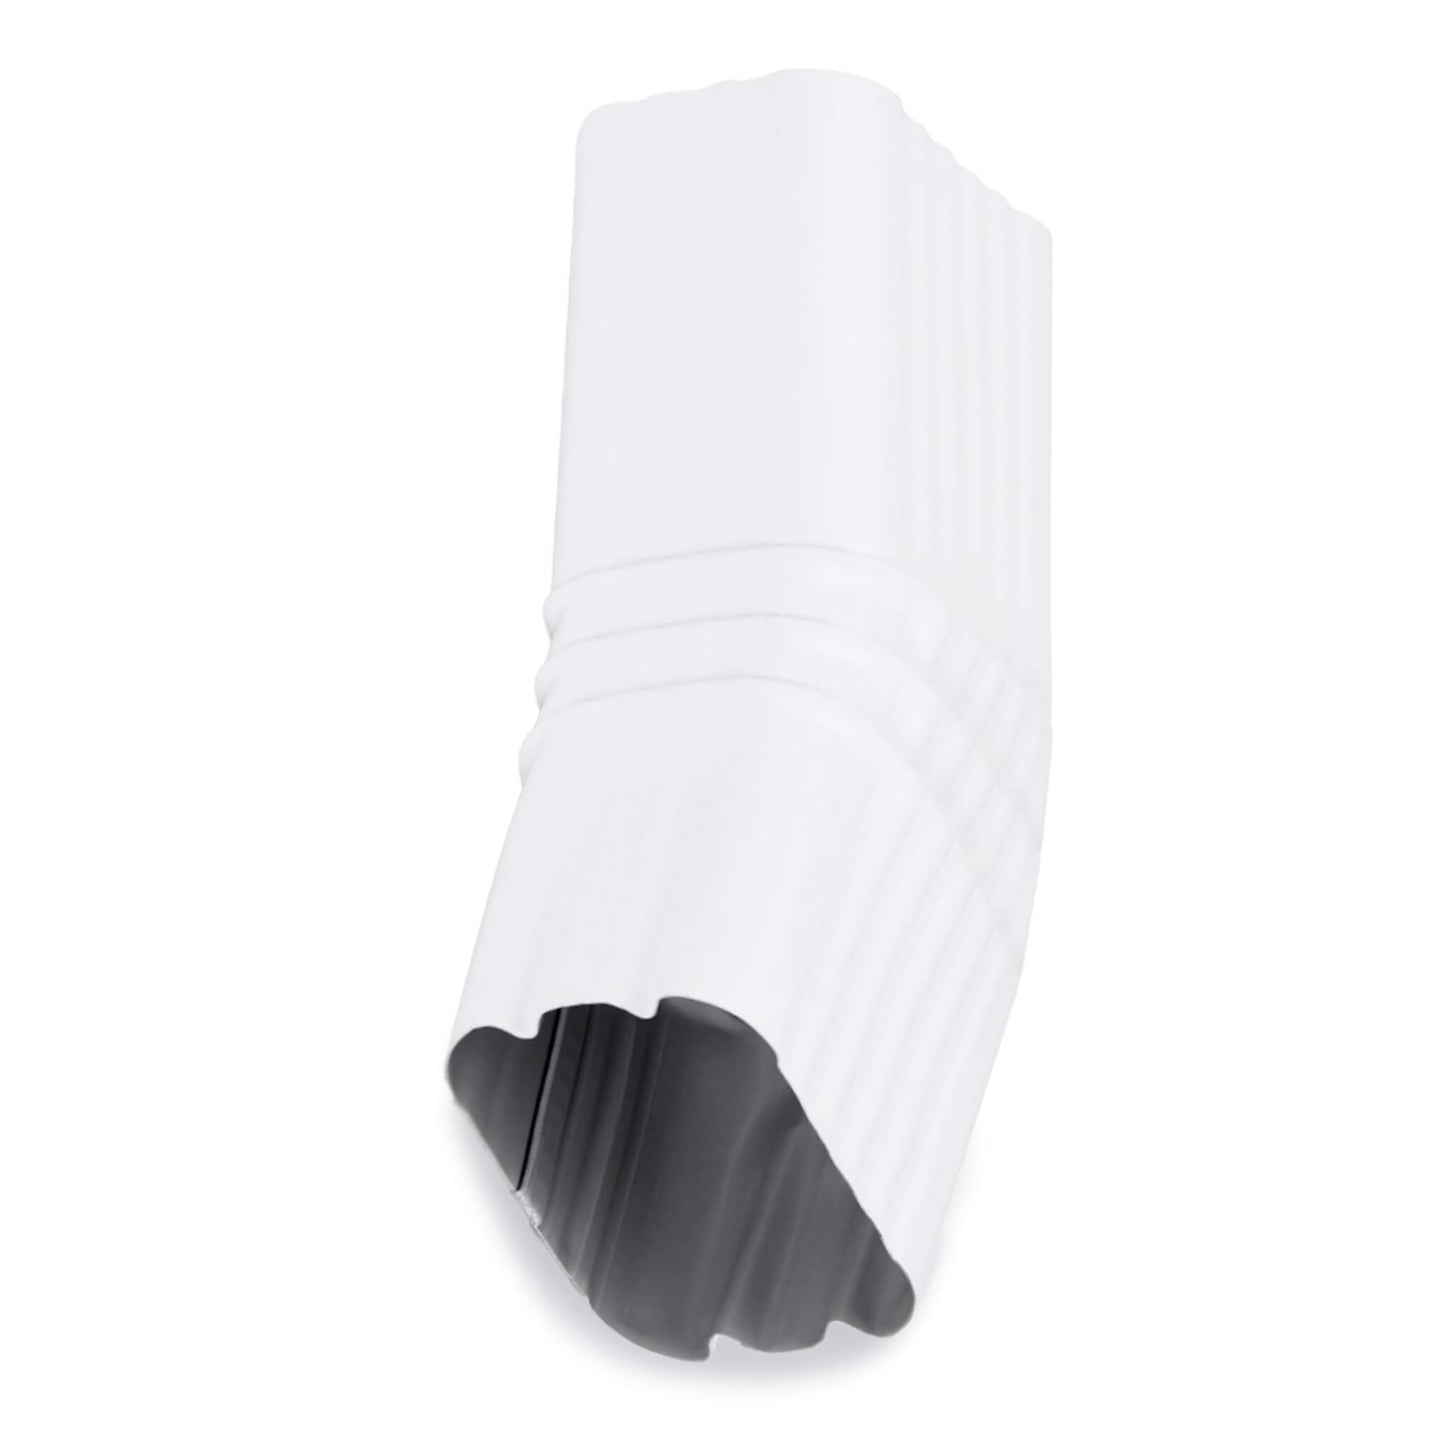 Short "B"  30° Gutter Elbow Multiple Sizes and Colors Available